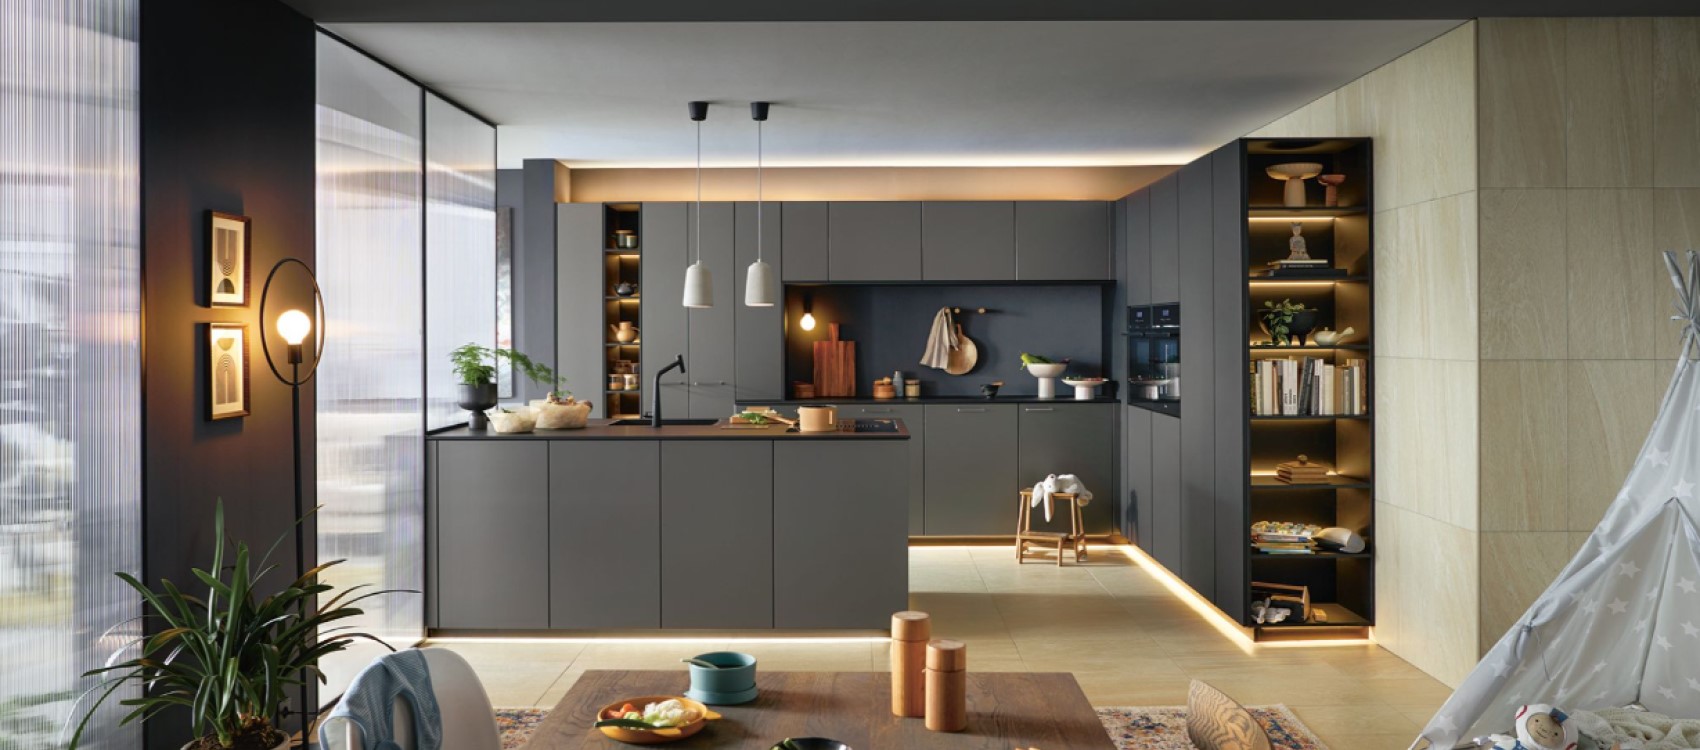 Schuller Smartglas kitchen in Titanio finish with backlit open shelving.